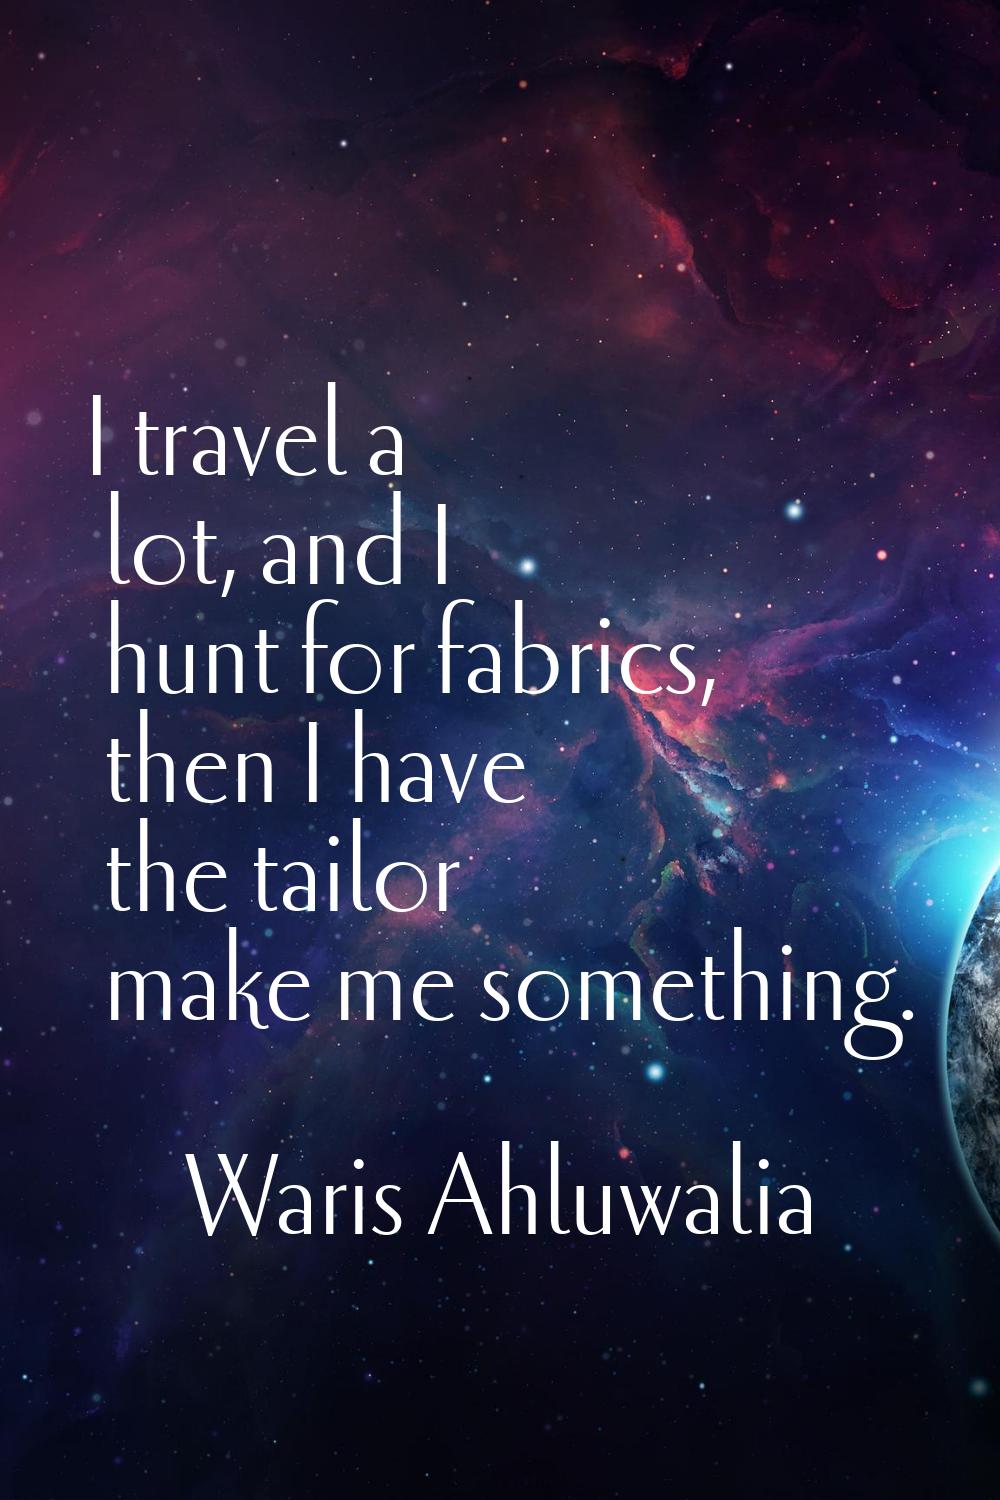 I travel a lot, and I hunt for fabrics, then I have the tailor make me something.